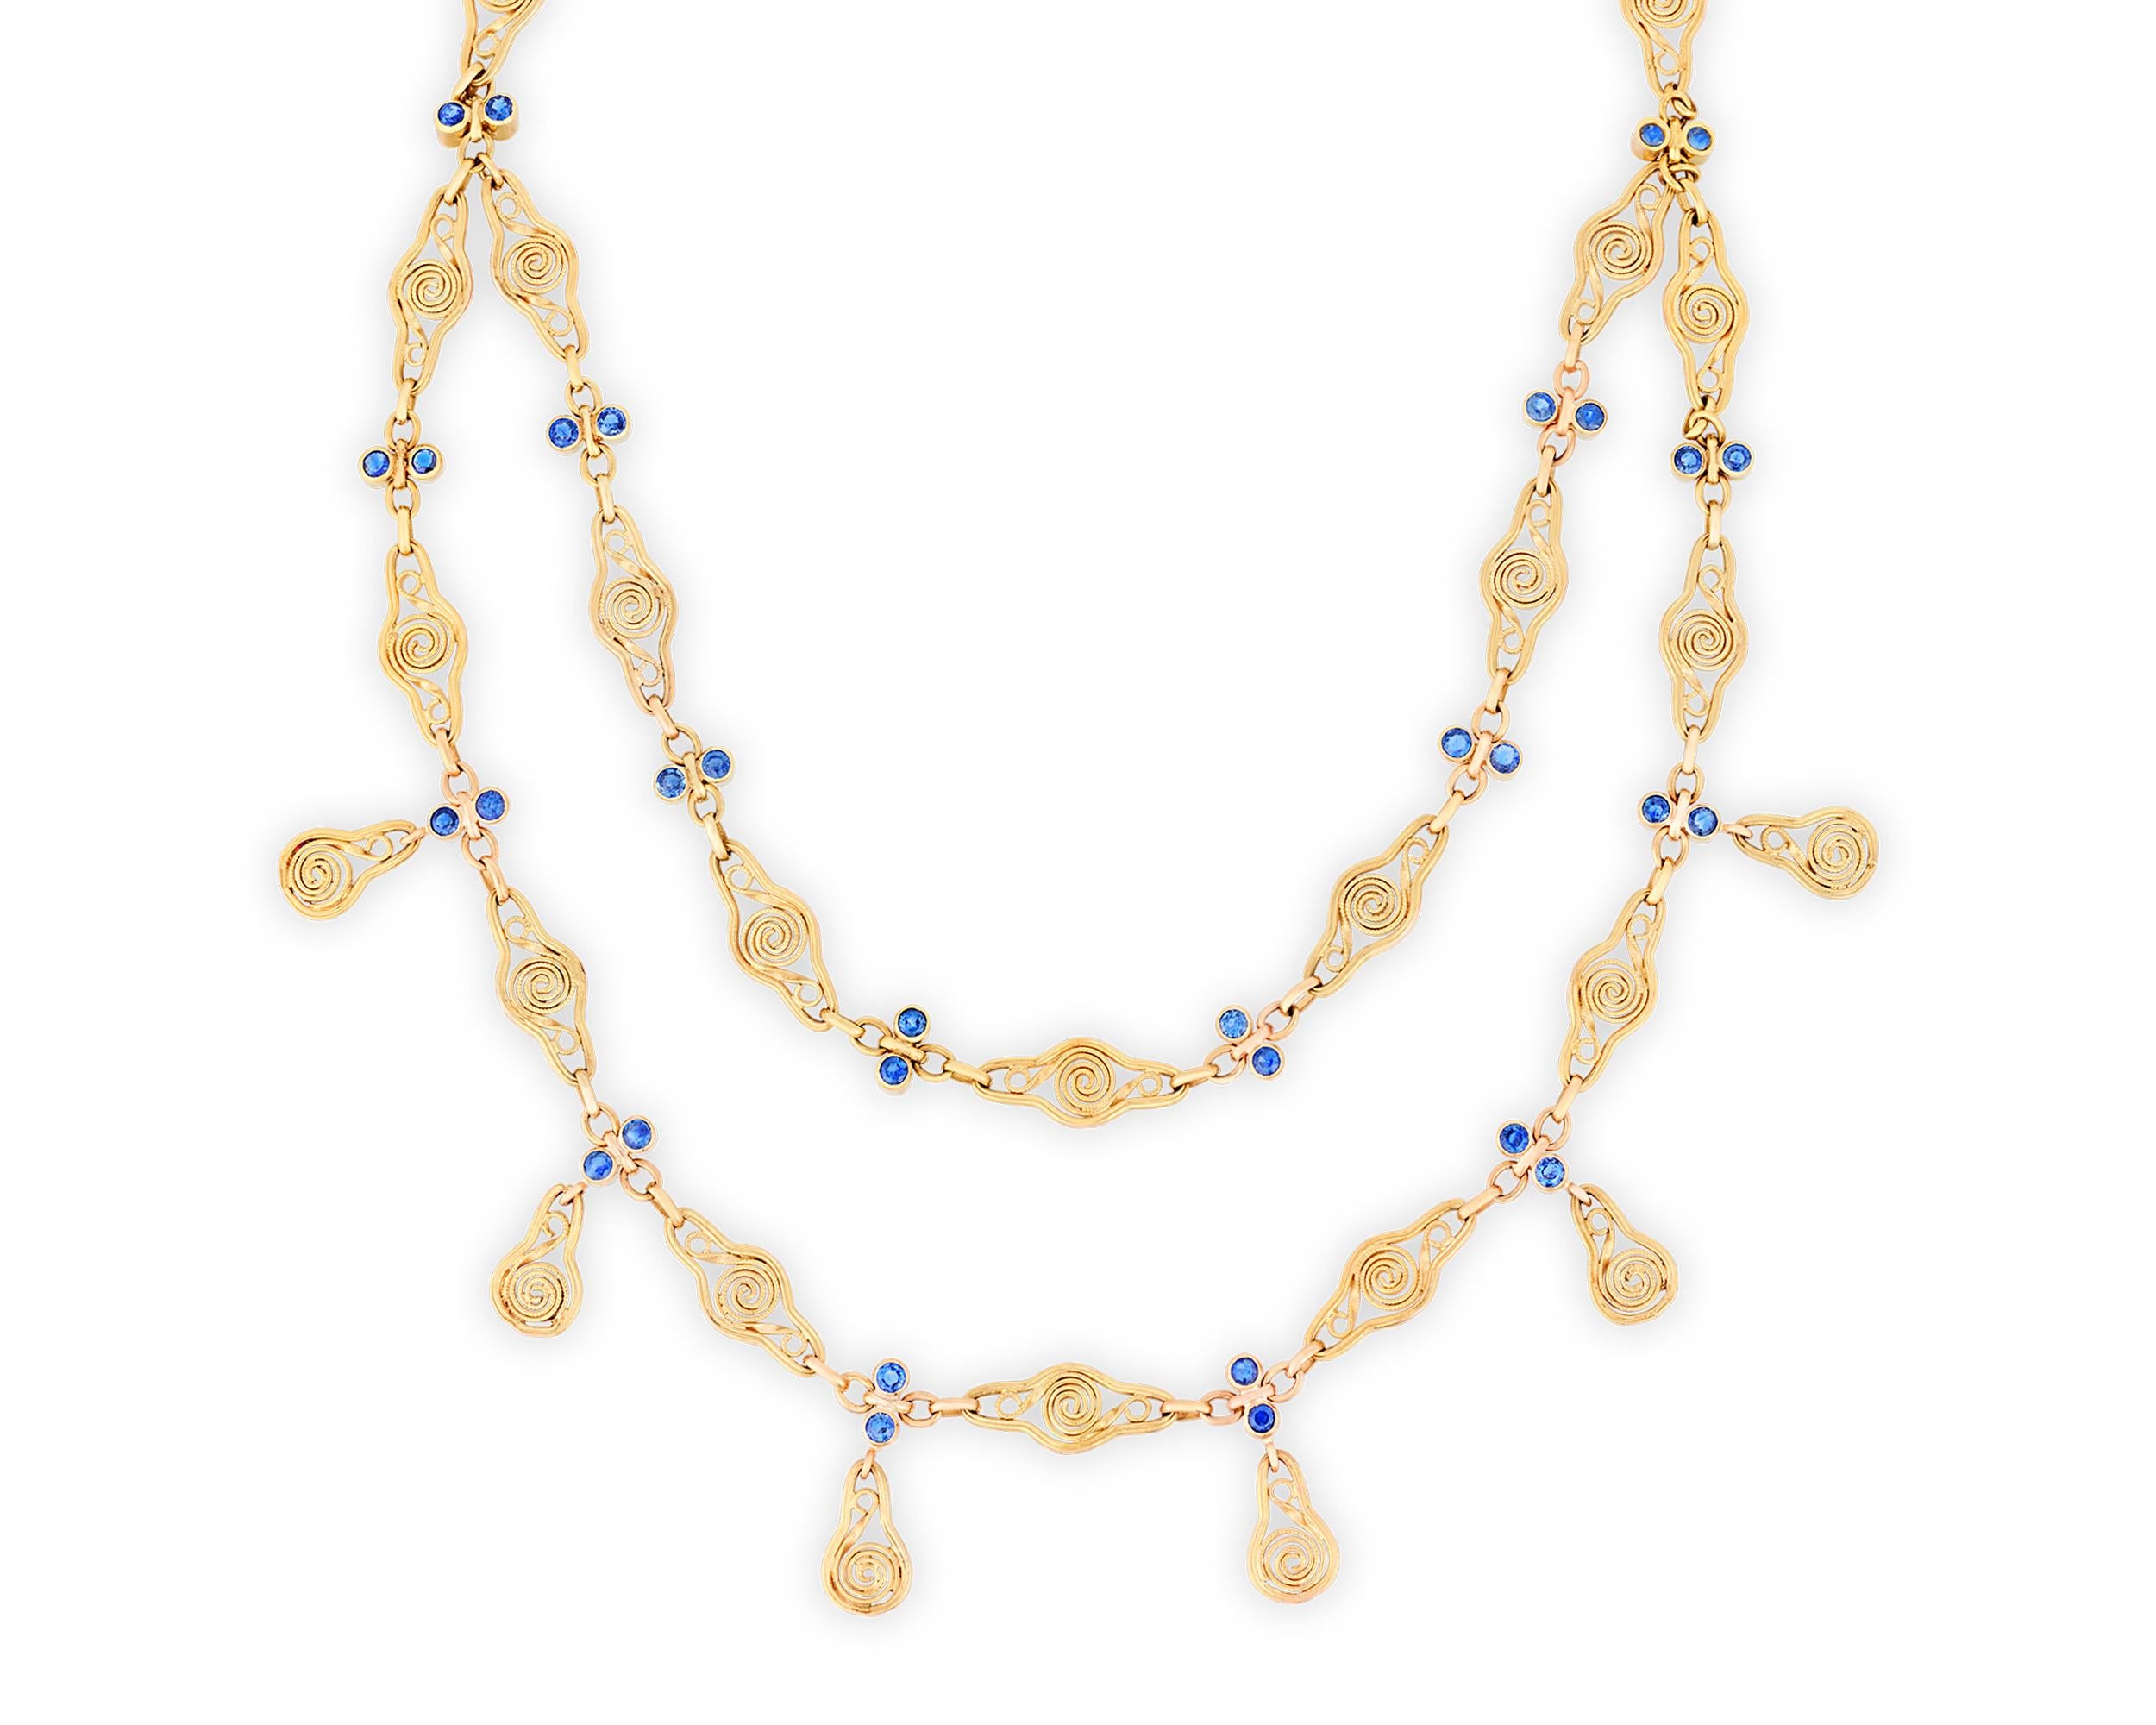 This Yogo sapphire and gold necklace, a masterful creation by Louis Comfort Tiffany, is a quintessential representation of the Art Nouveau style. It features a swirling festoon design, a popular motif of the era, emphasizing grace and fluidity. The